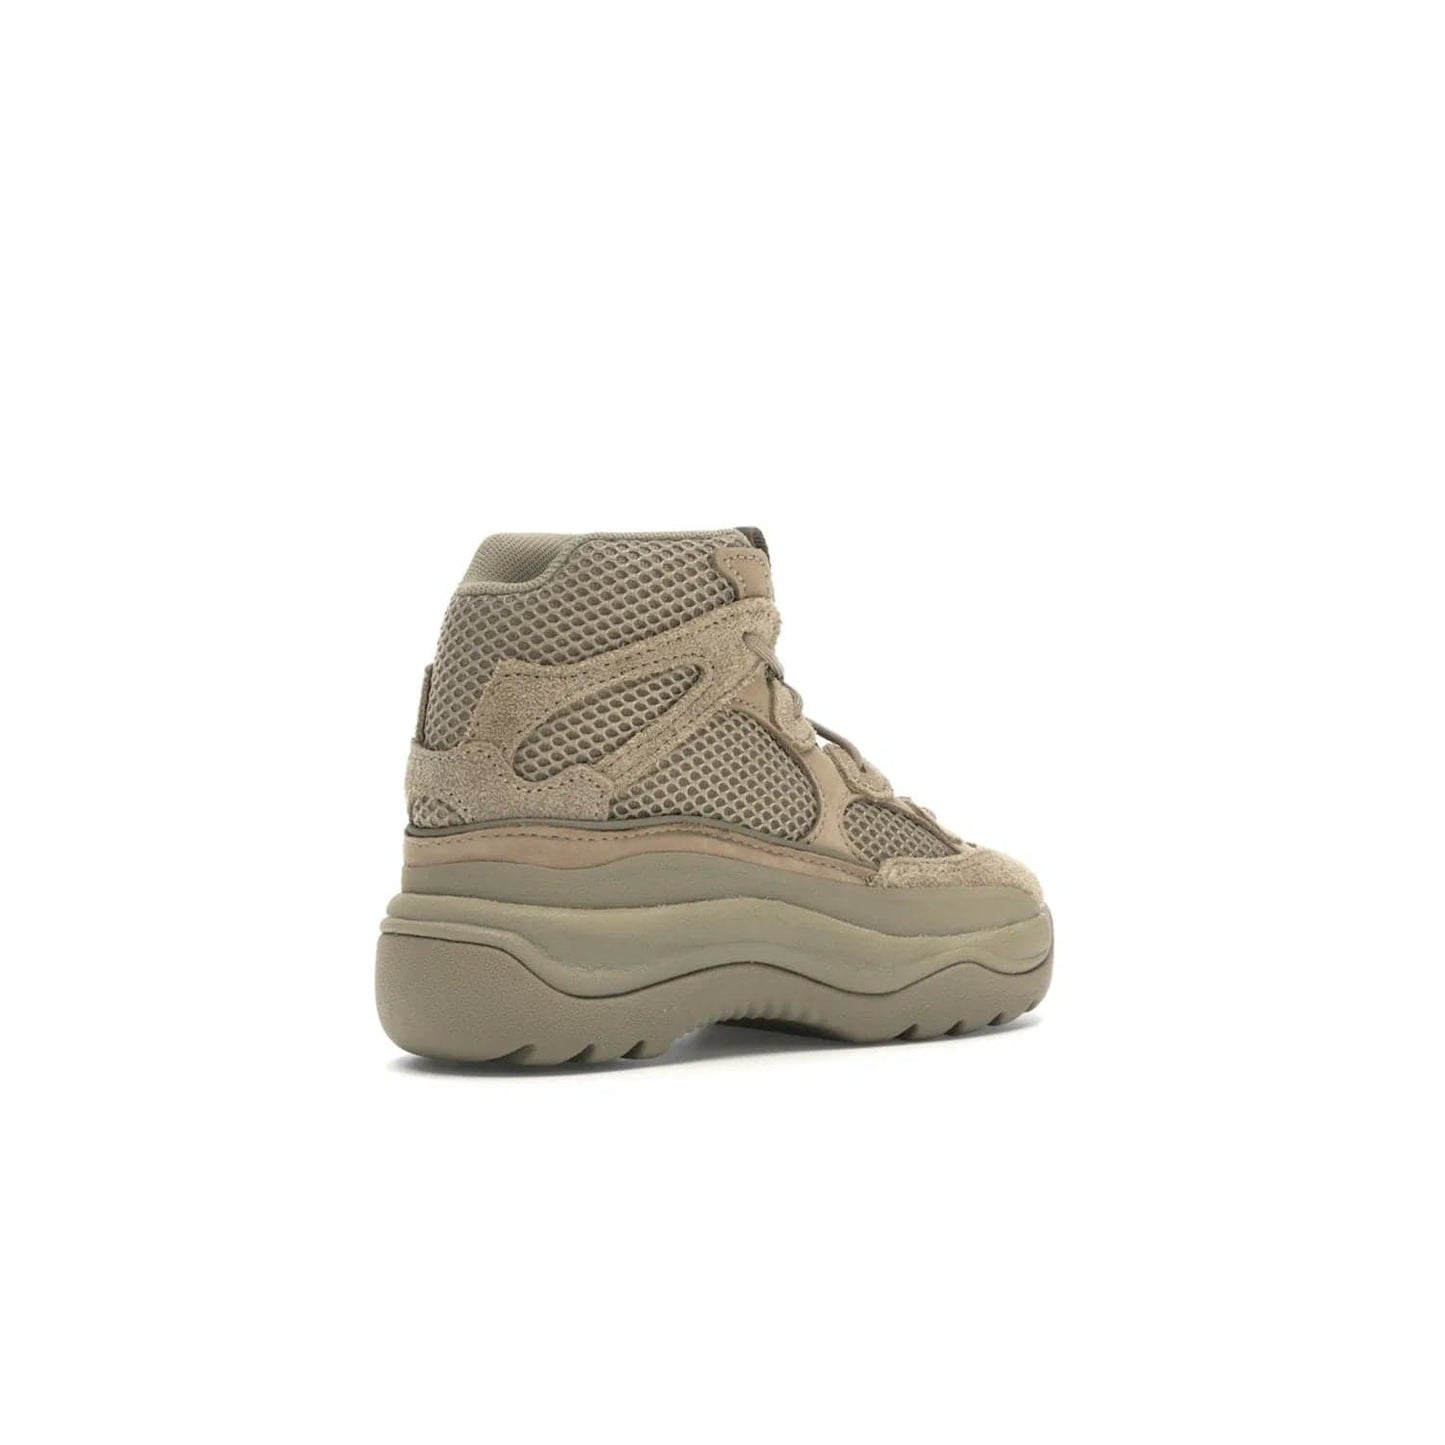 adidas Yeezy Desert Boot Rock (Kids) - Image 33 - Only at www.BallersClubKickz.com - Elevate your style this season with the adidas Yeezy Desert Boot Rock. Crafted from layered nylon and suede, this chic kids' silhouette features an EVA midsole and rubber outsole for superior cushioning and traction.